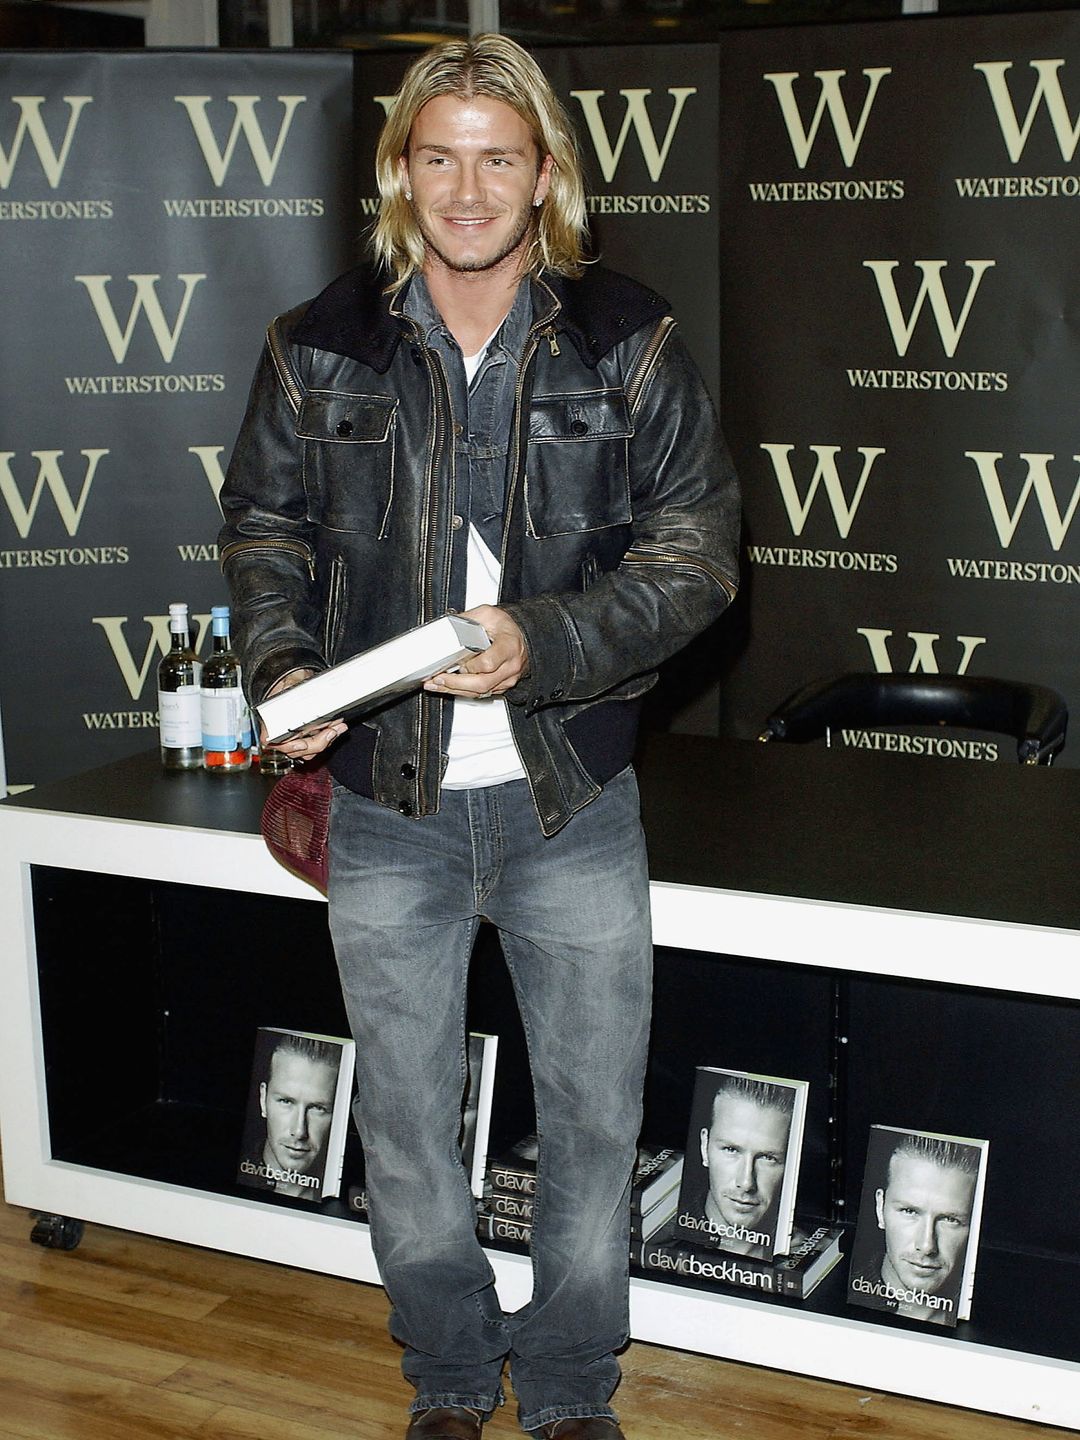 Footballer David Beckham holds his autobiography "My Side" at the Waterstone's Book store in Piccadilly on November 17, 2003 wearing jeans, a jean jacket and leather jacket overtop